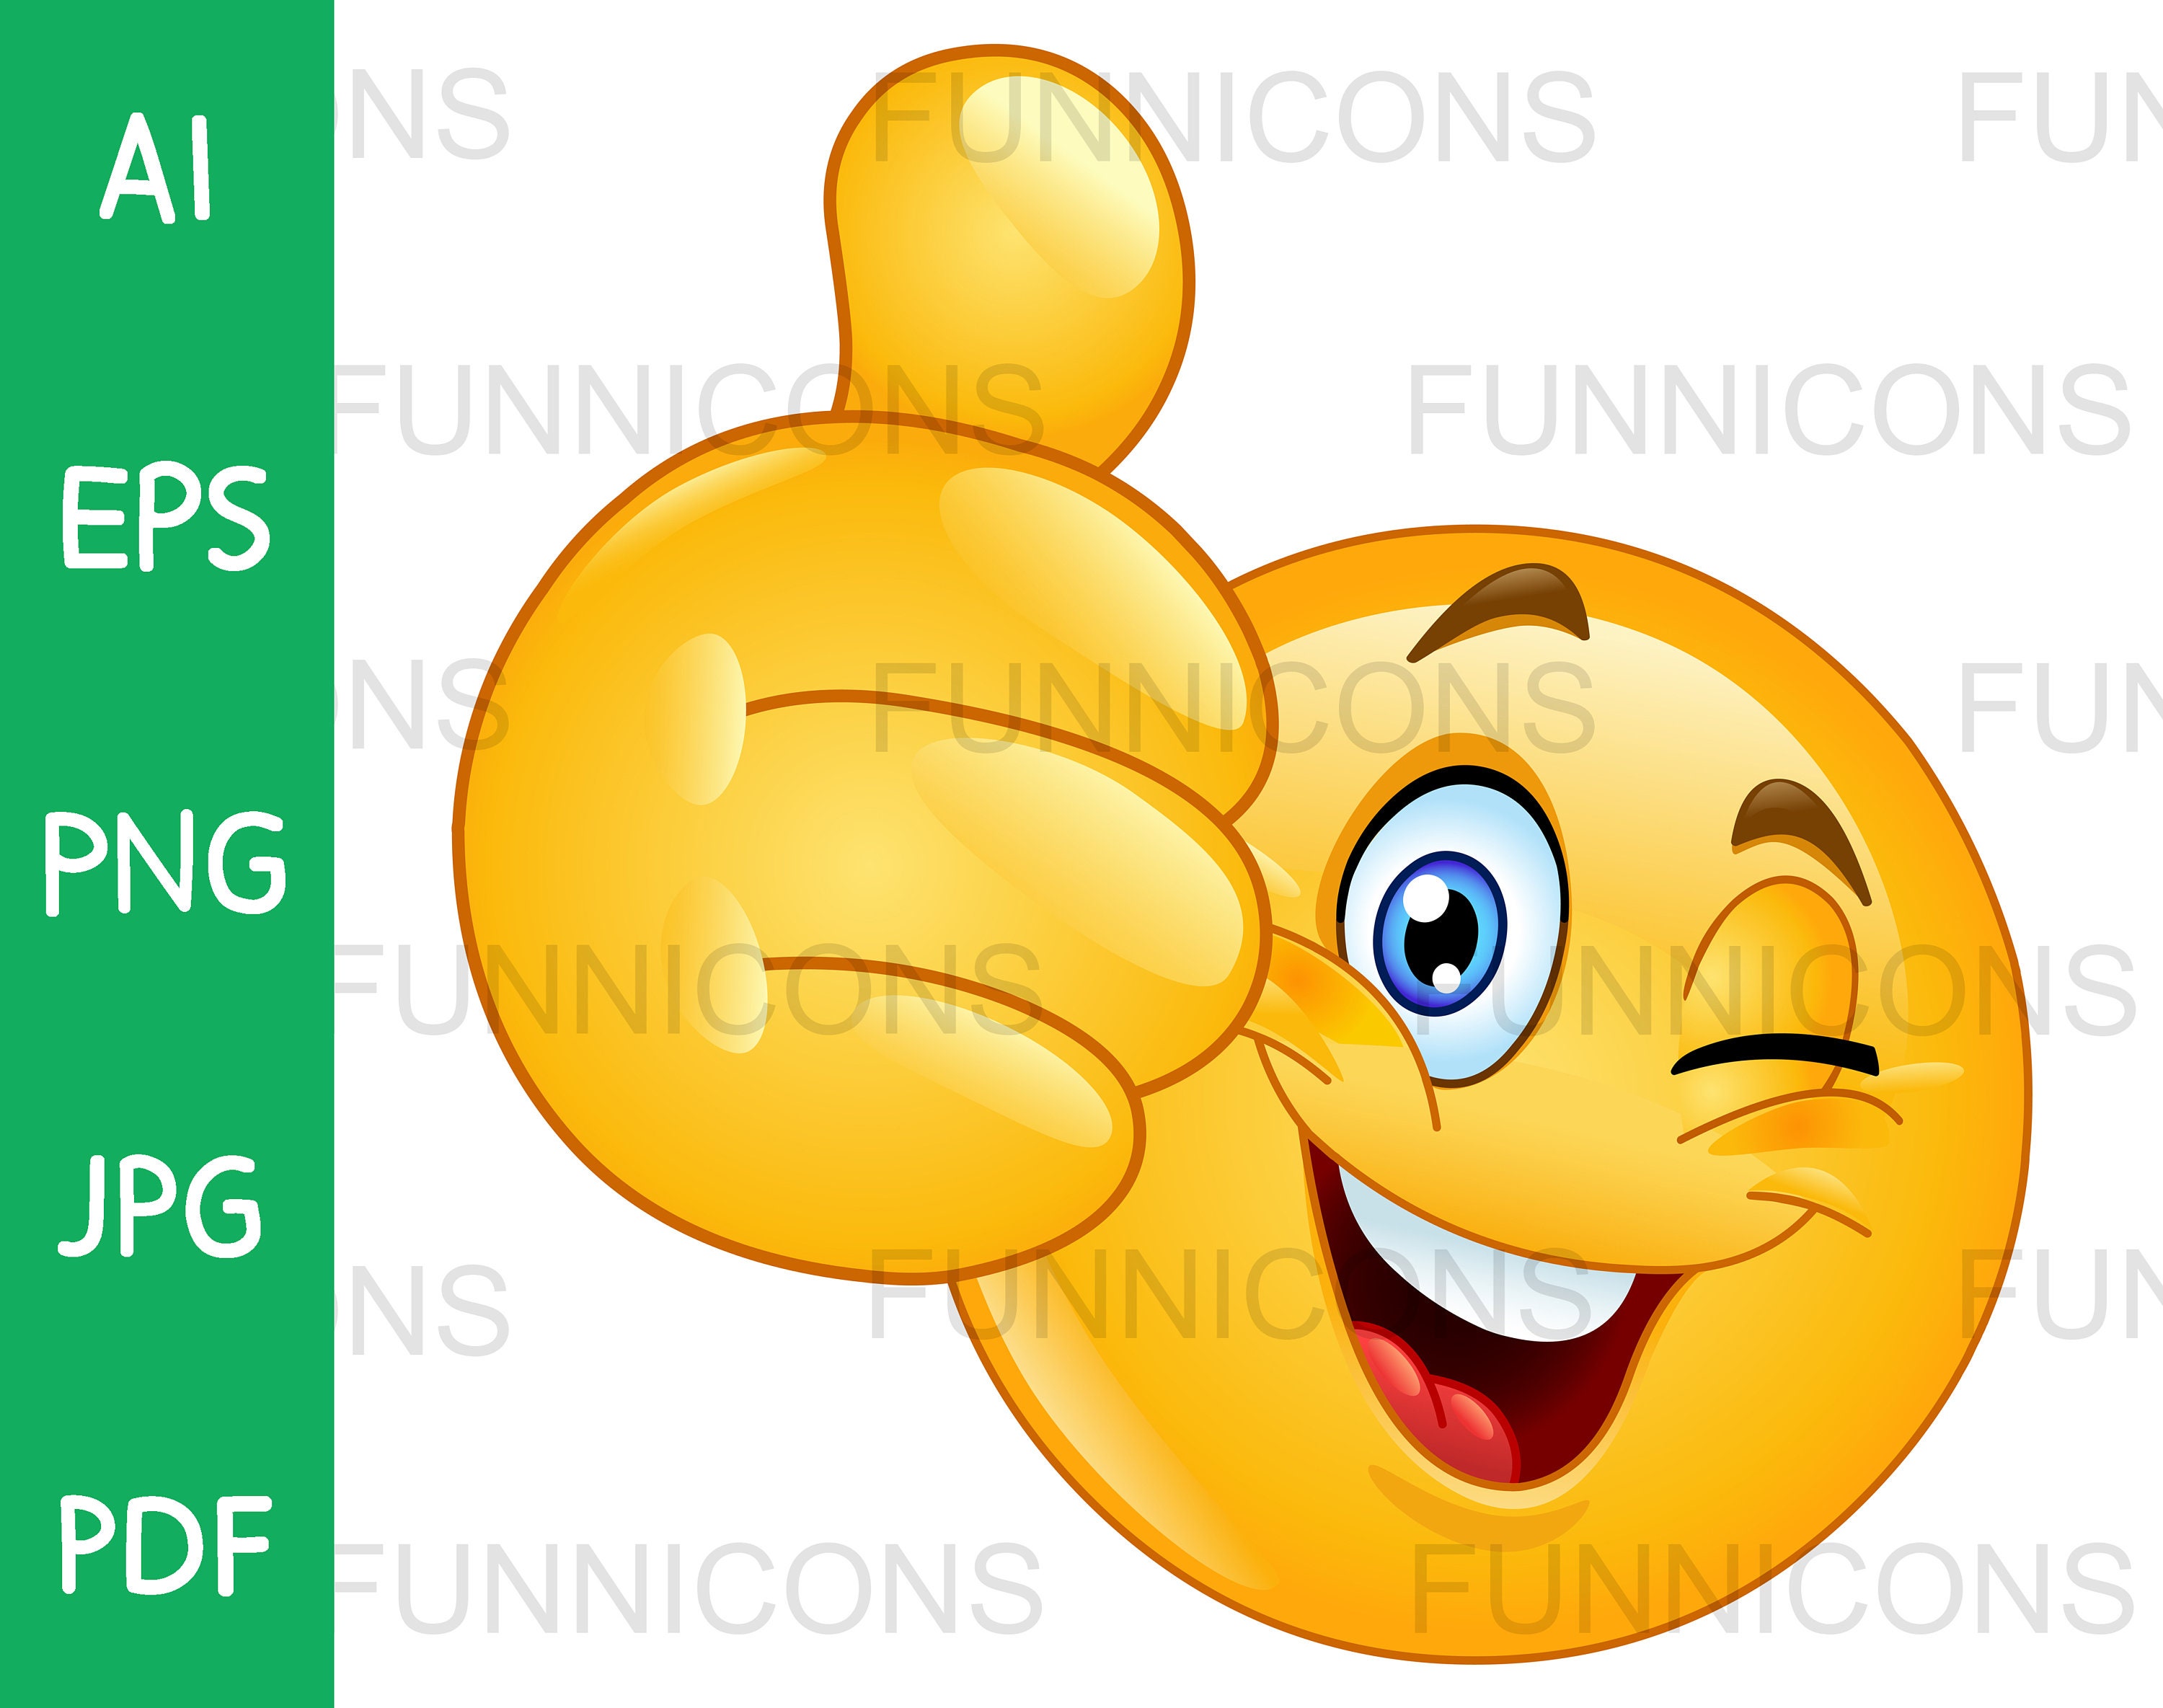 Clipart Cartoon of a Happy Chinese Emoji Emoticon (Instant Download) 